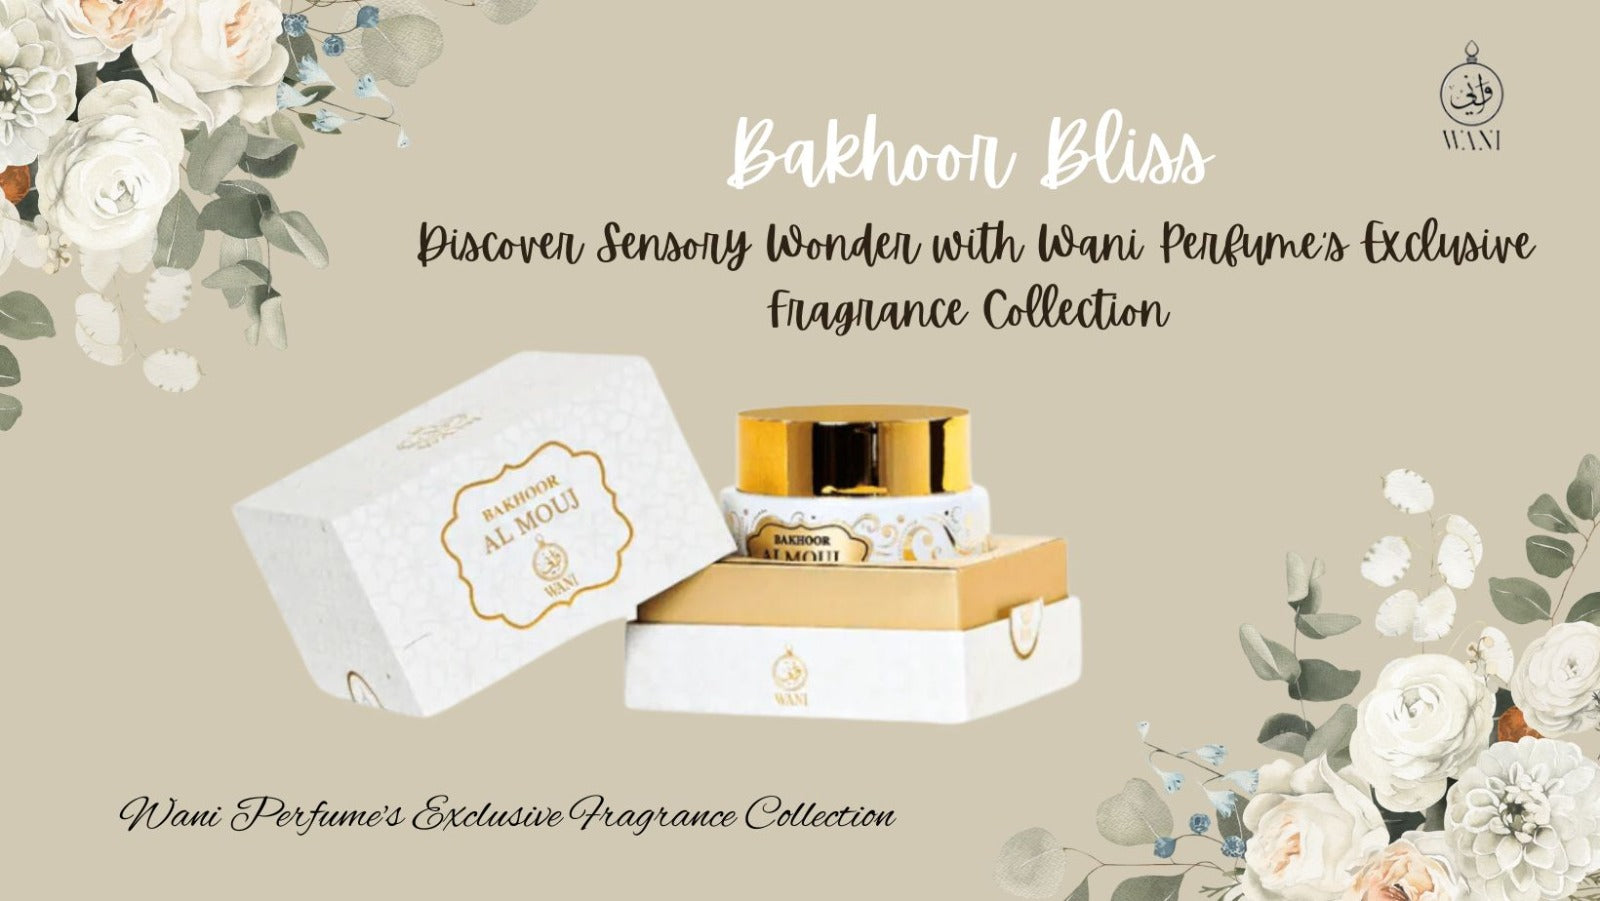 Bakhoor Bliss: Discover Sensory Wonder with Wani Perfume's Exclusive Fragrance Collection